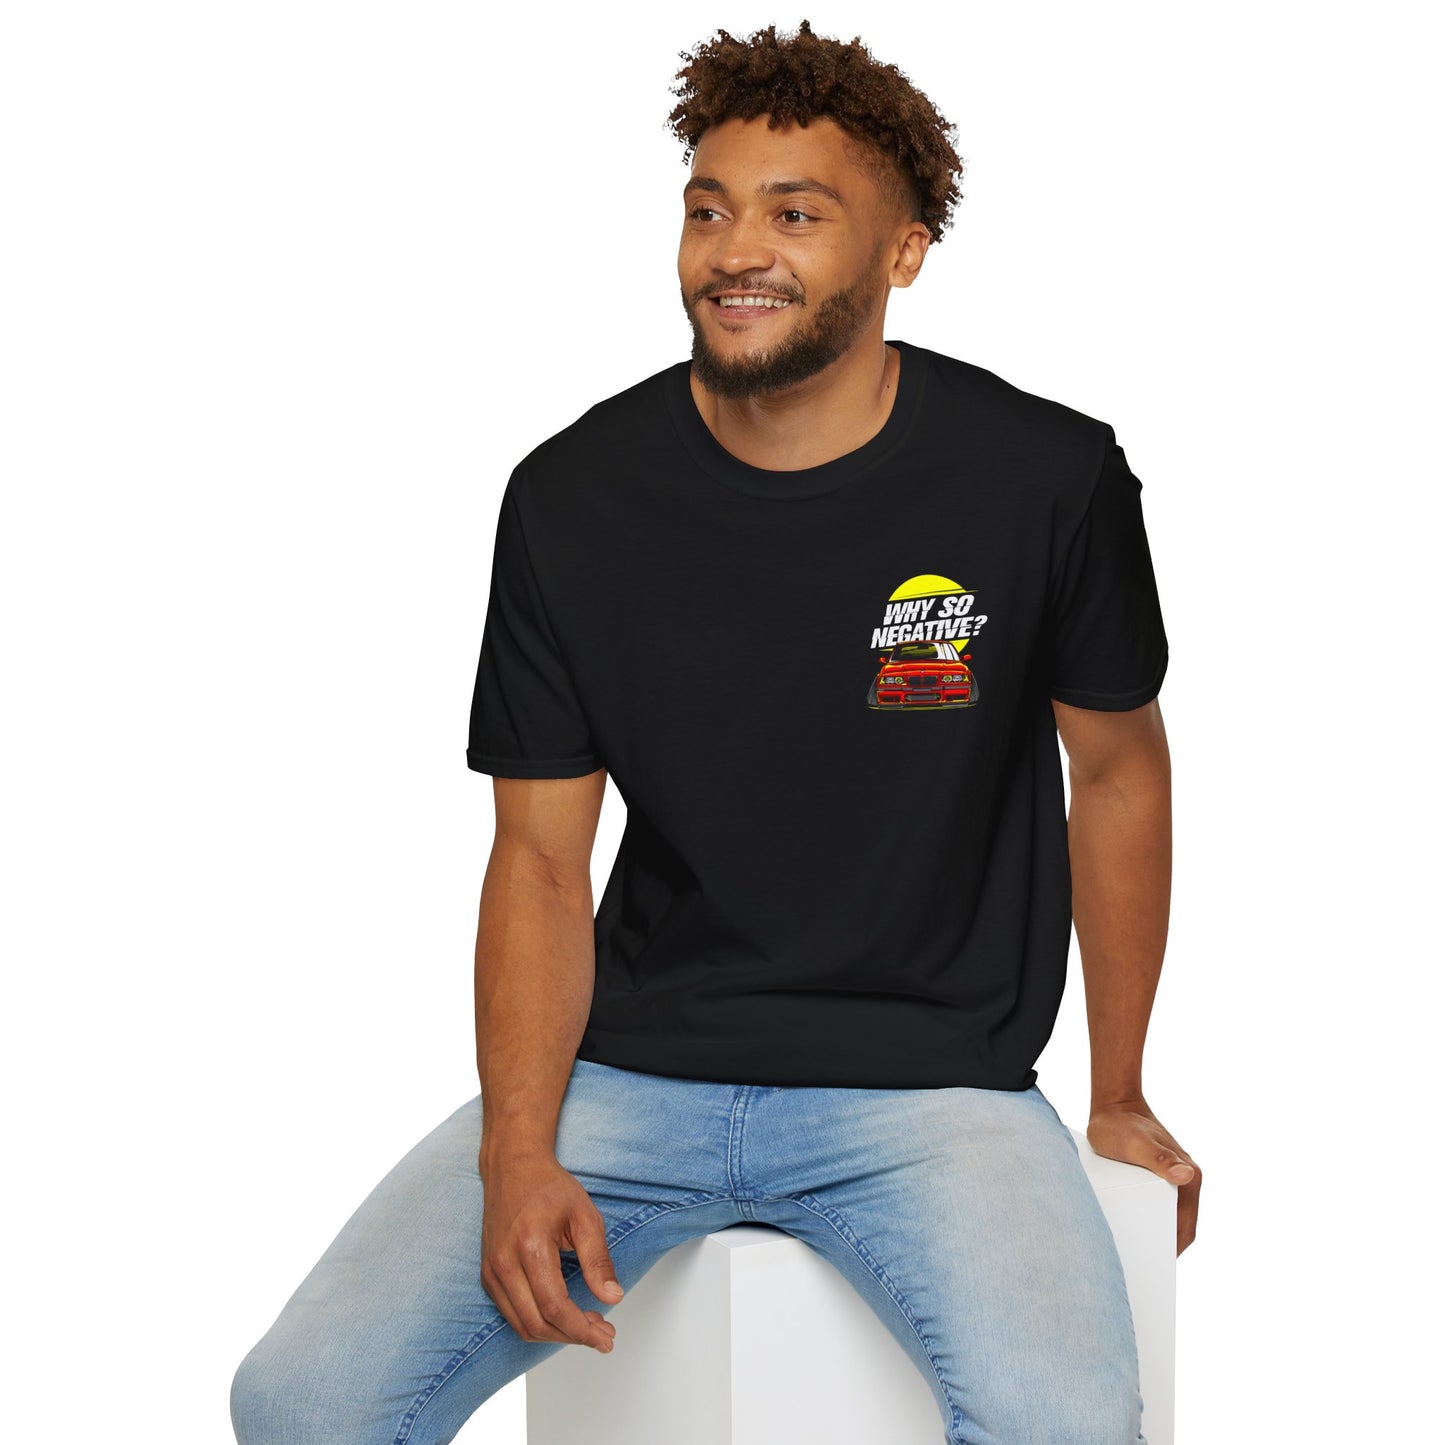 Why So Negative? Beemer Graphic Unisex Softstyle T-Shirt